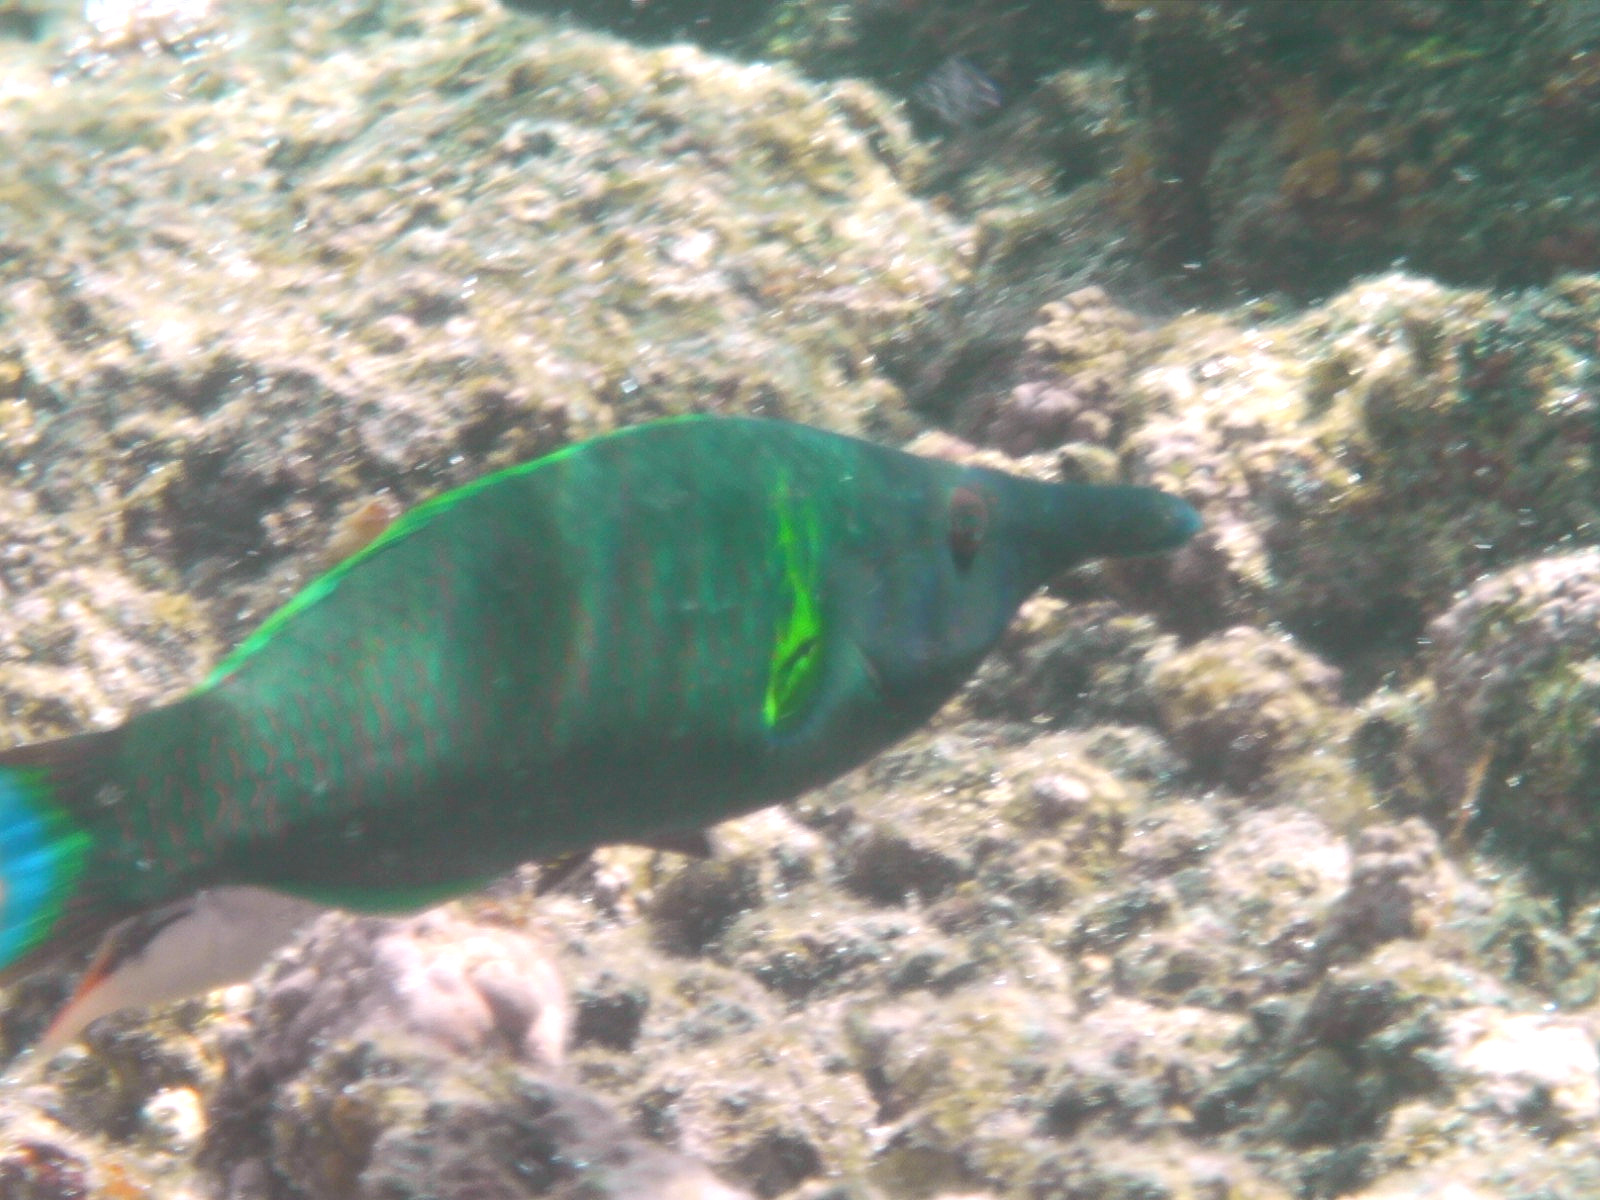 this is a blue and green sea fish